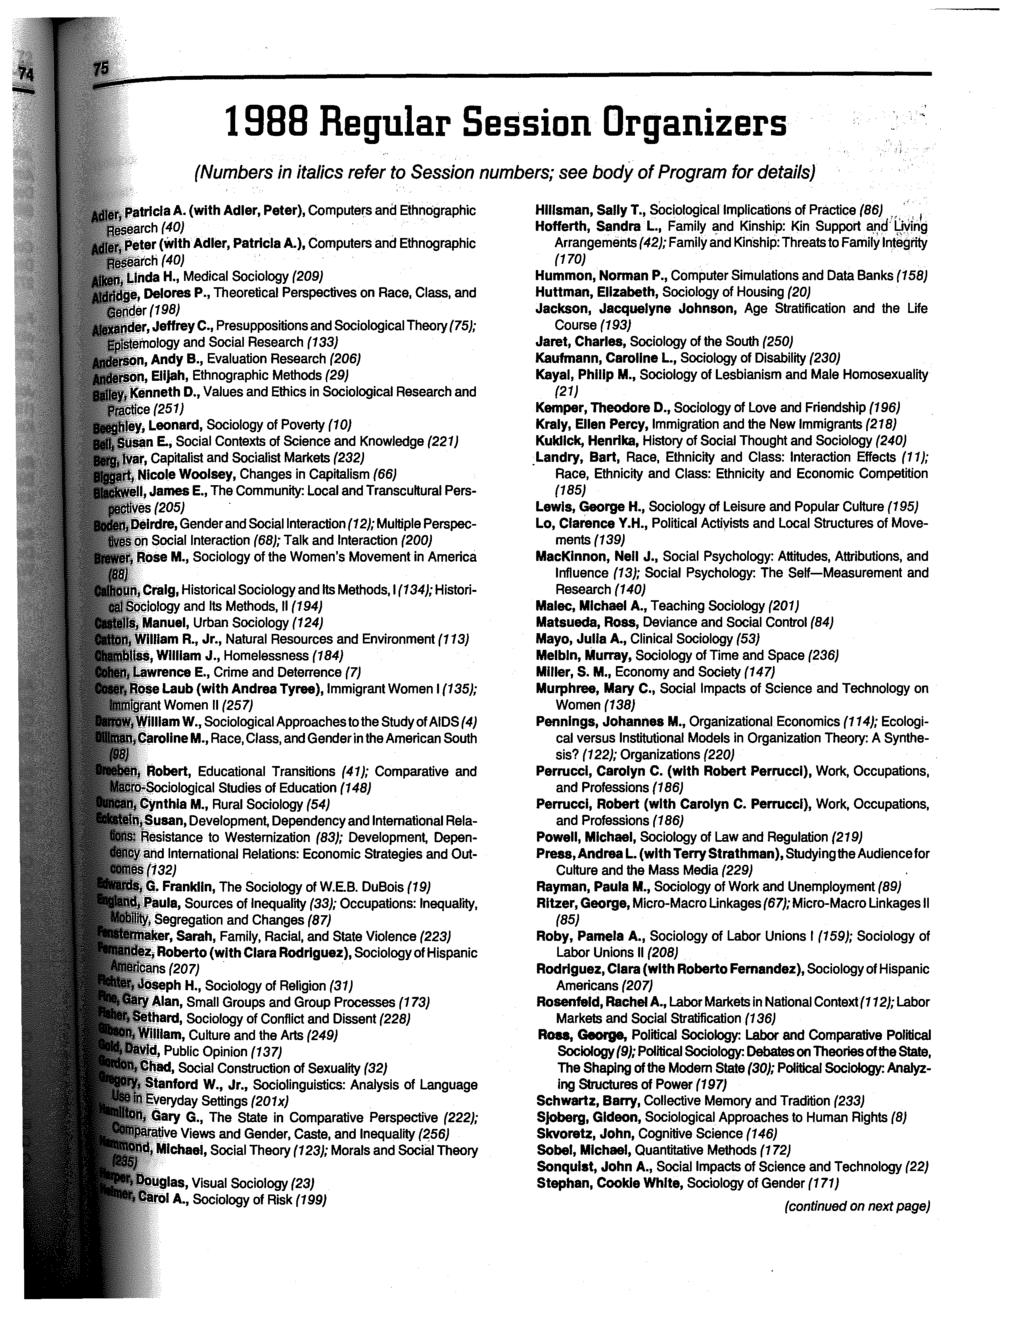 1 988 Regular Session Organizers (Numbers in italics refer to Session numbers; see body of Program for details) A. {with Adler, Peter), Computers and Ethnographic (40) (With Adler, Patricia A.